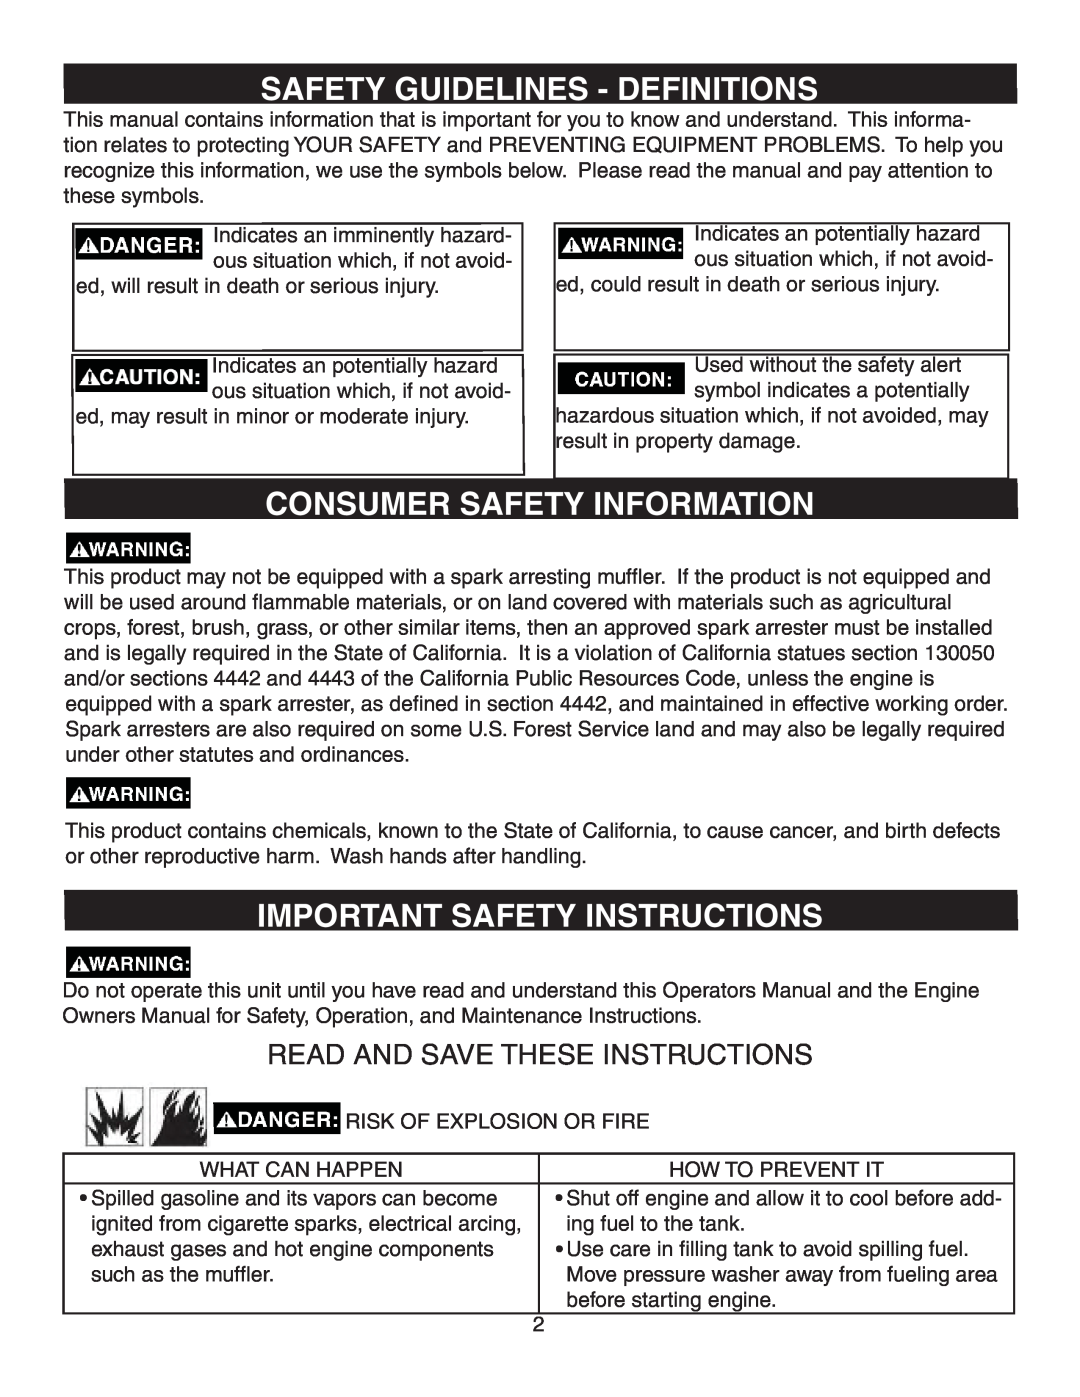 Simpson MSV3000, MSV2600 Safety Guidelines - Definitions, Consumer Safety Information, Important Safety Instructions 